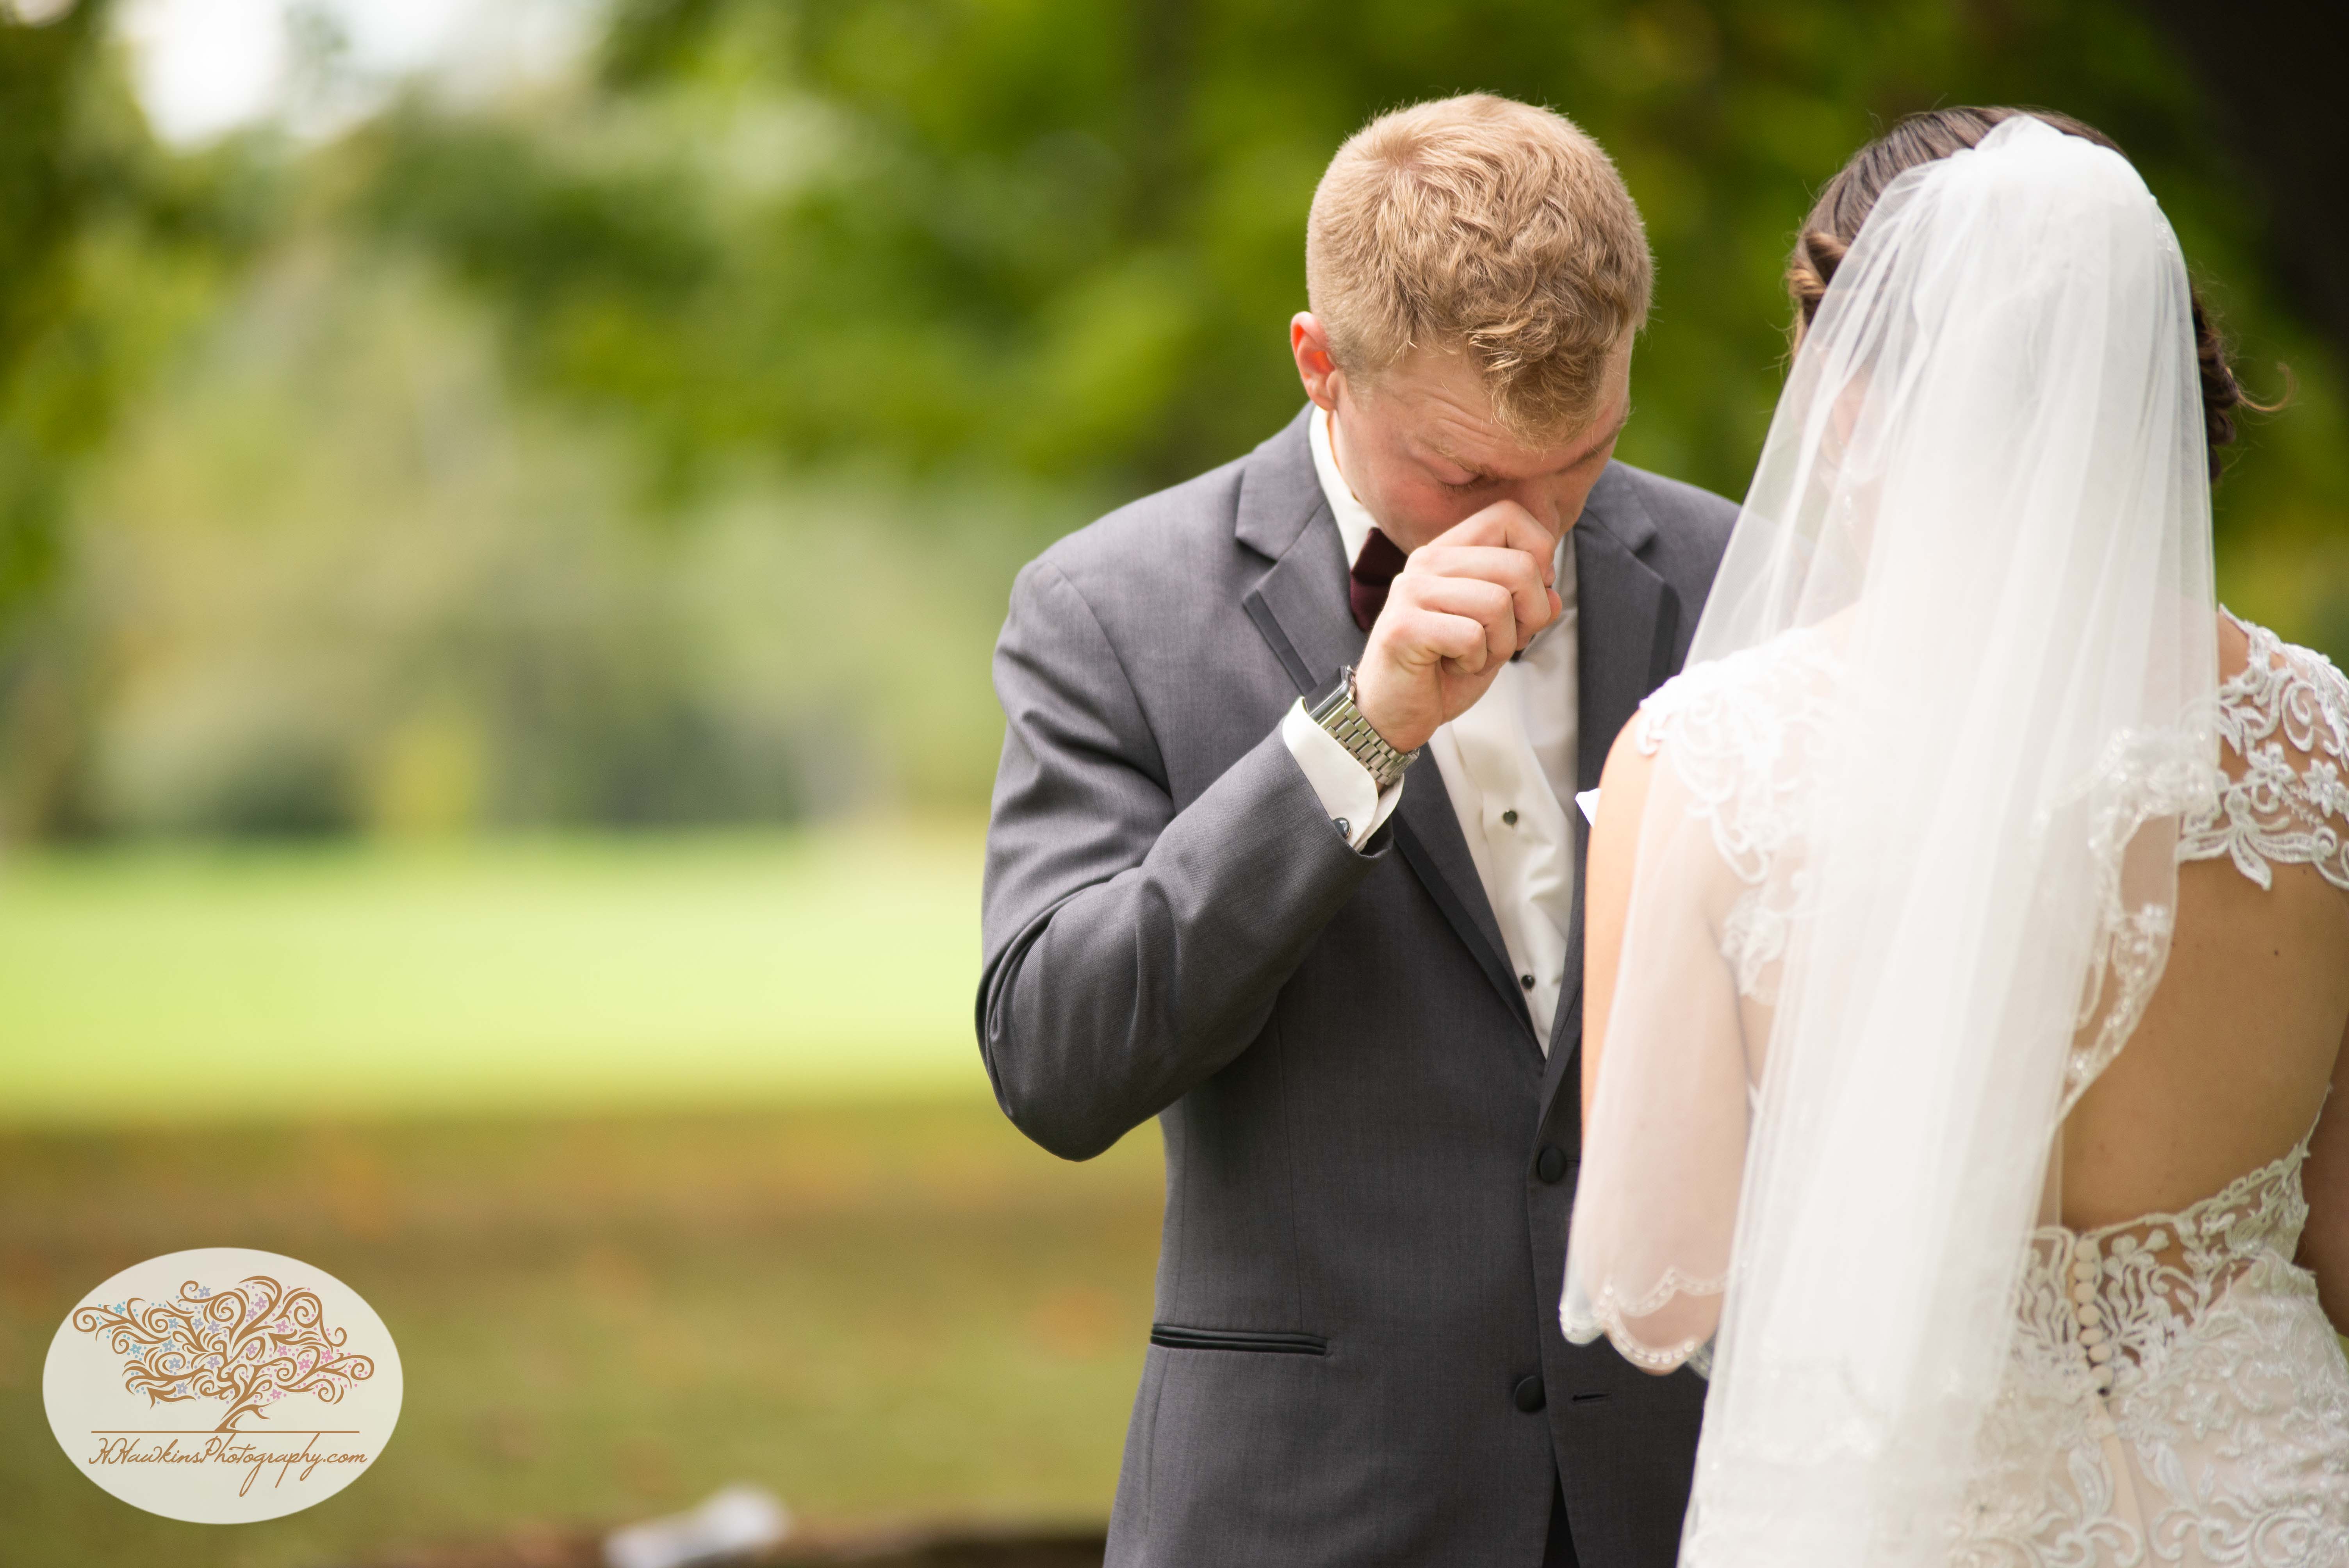 Groom wipes a tear from his eye during their first look